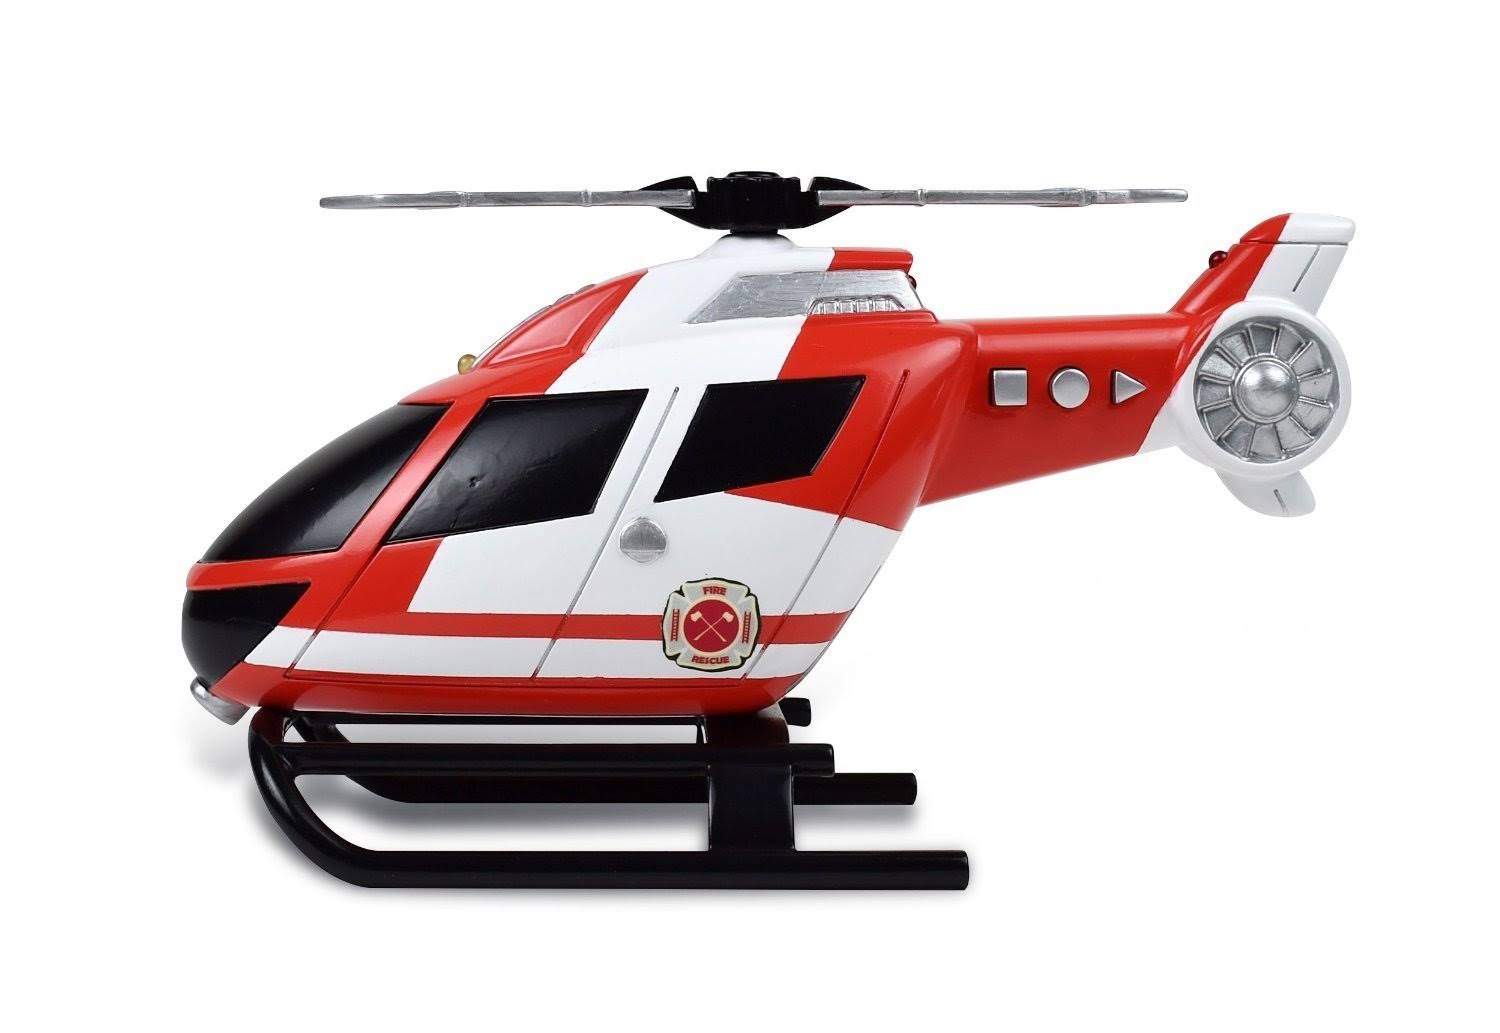 Maxx Action Light & Sound Rescue Vehicle Toy Helicopter